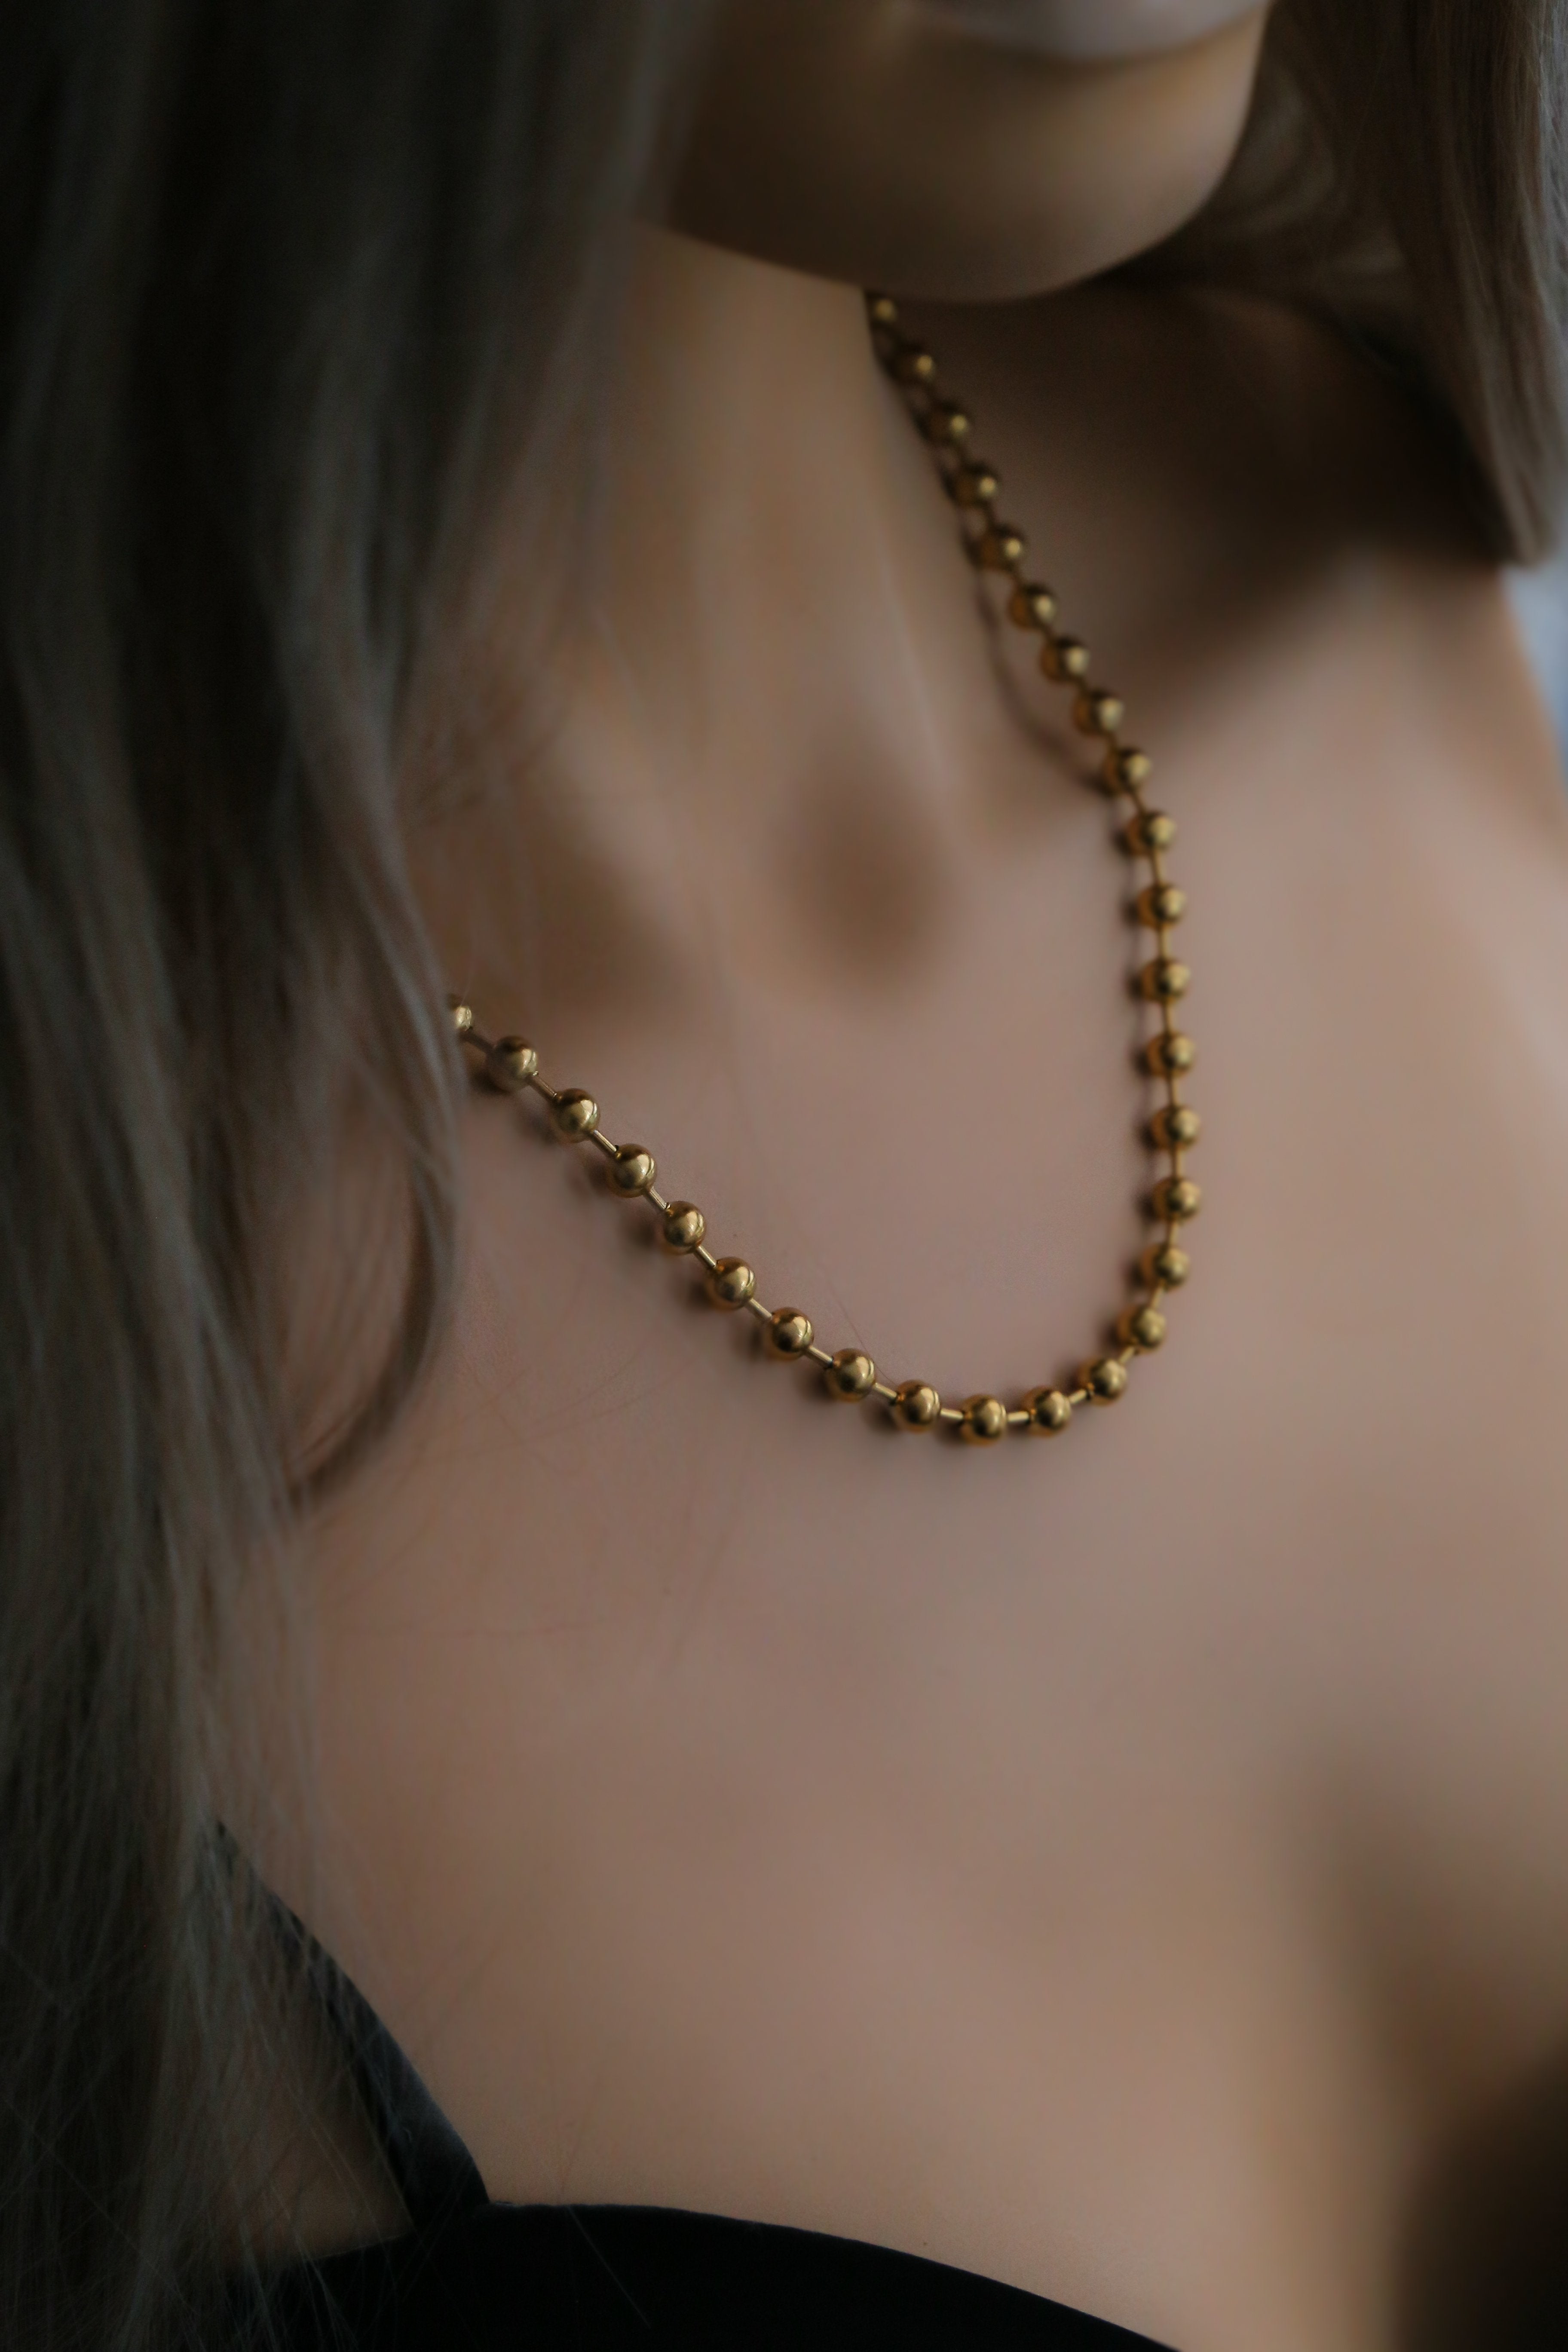 Aria Necklace - Boutique Minimaliste has waterproof, durable, elegant and vintage inspired jewelry